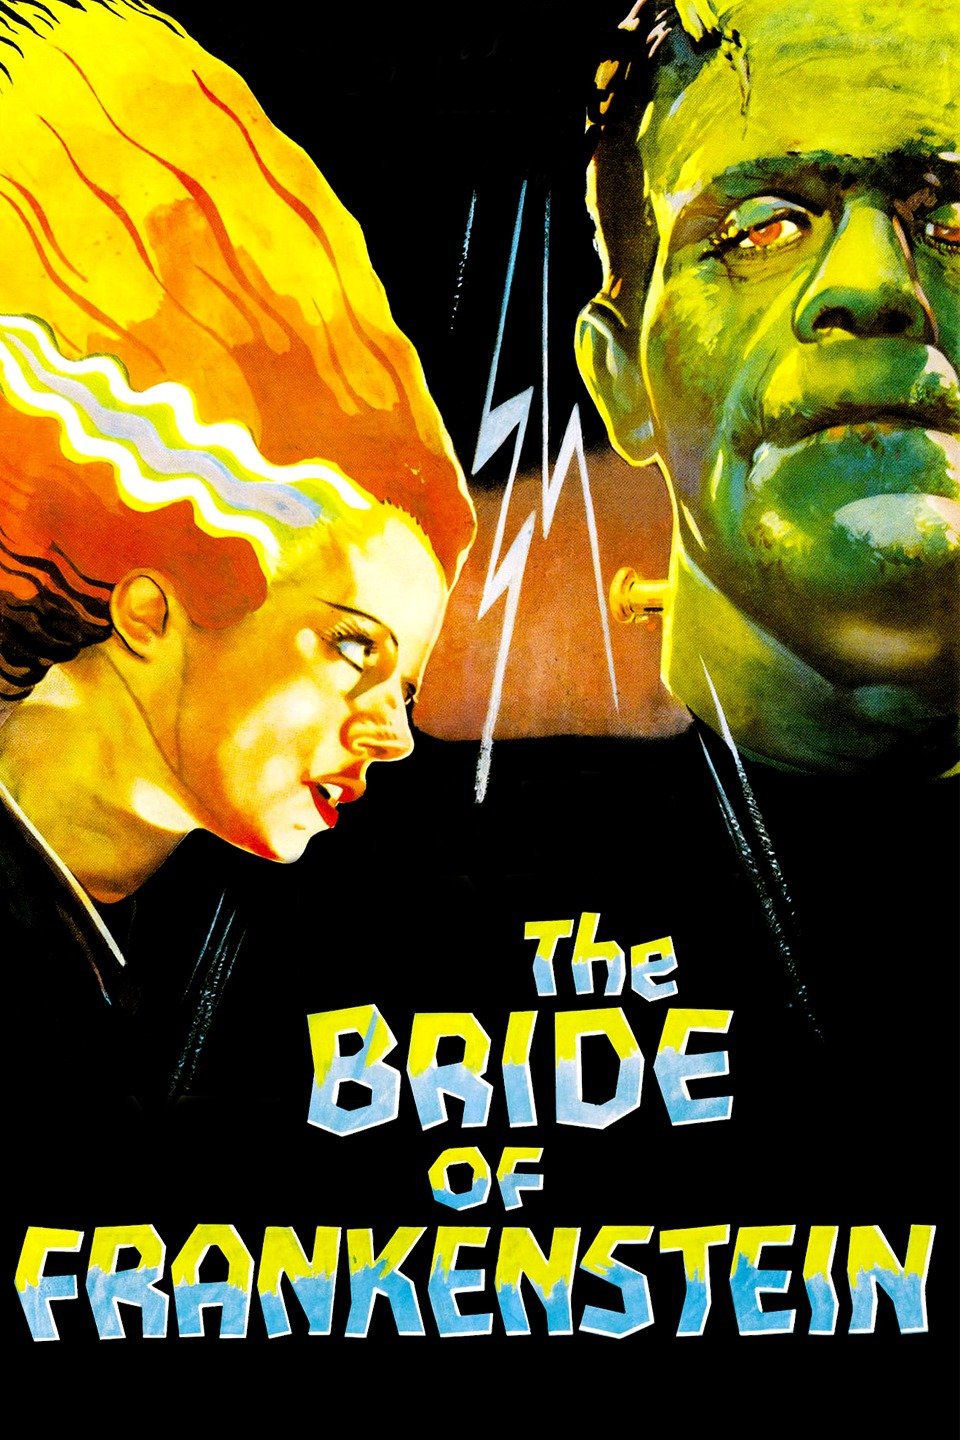 The Bride of Frankenstein - Top 25 Horror Movies of All Time